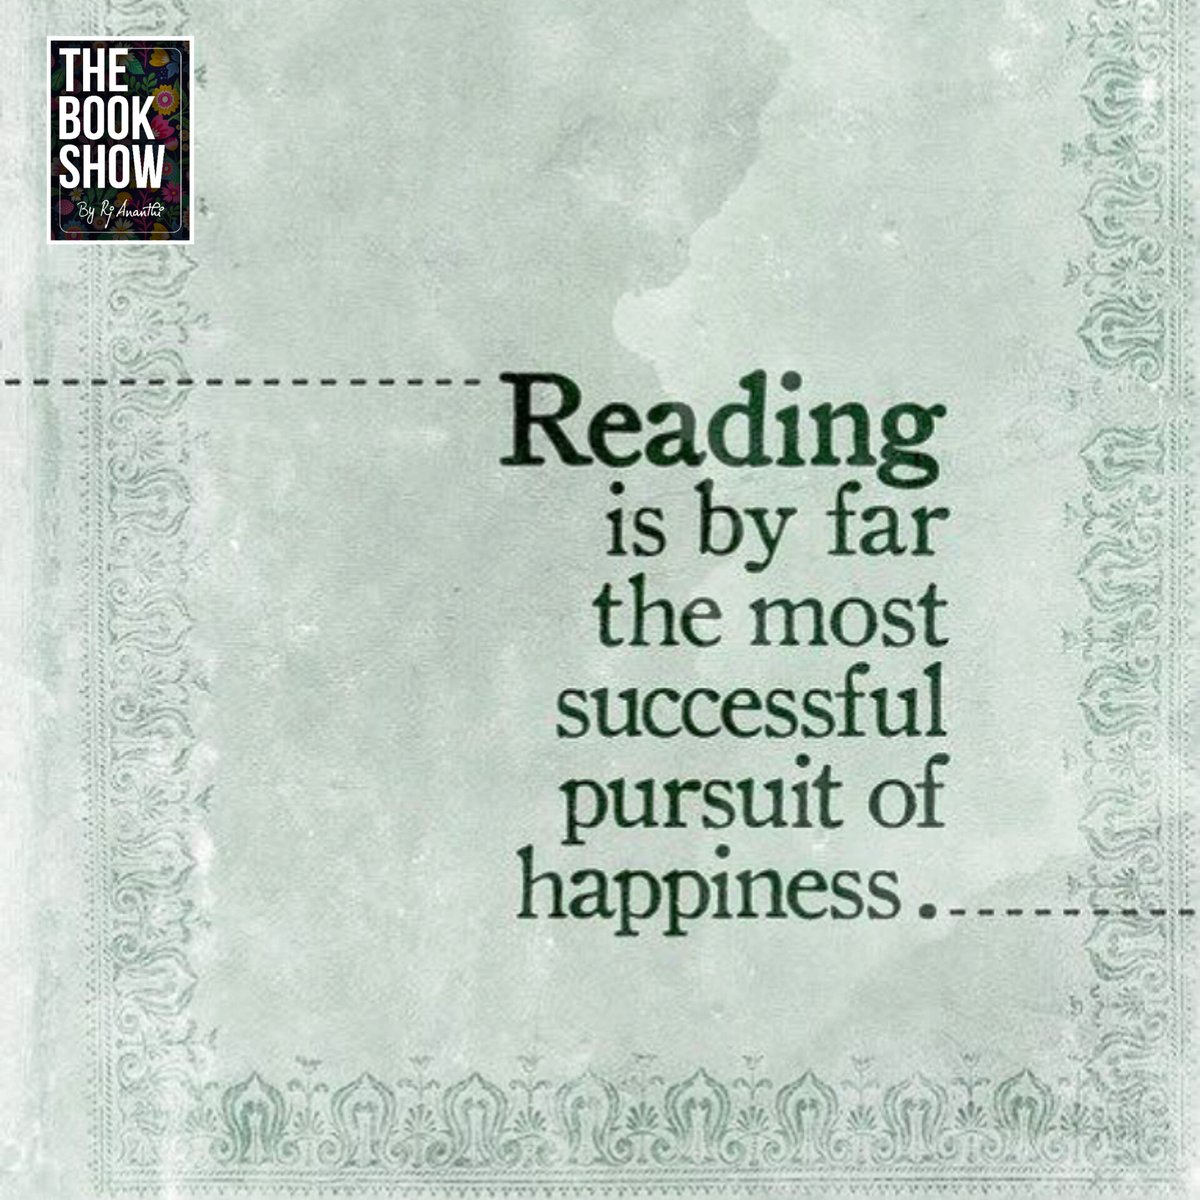 What's your pursuit of happiness 😊❤️

Comment below.

#TheBookShow #booksarethebest #LoveReading #Booklover #author #quotes #goodthoughts
#goodreads #goodvibesonly #bookrecommendations
#Bookfluencer #rjananthi
#bookreading #booktwitter